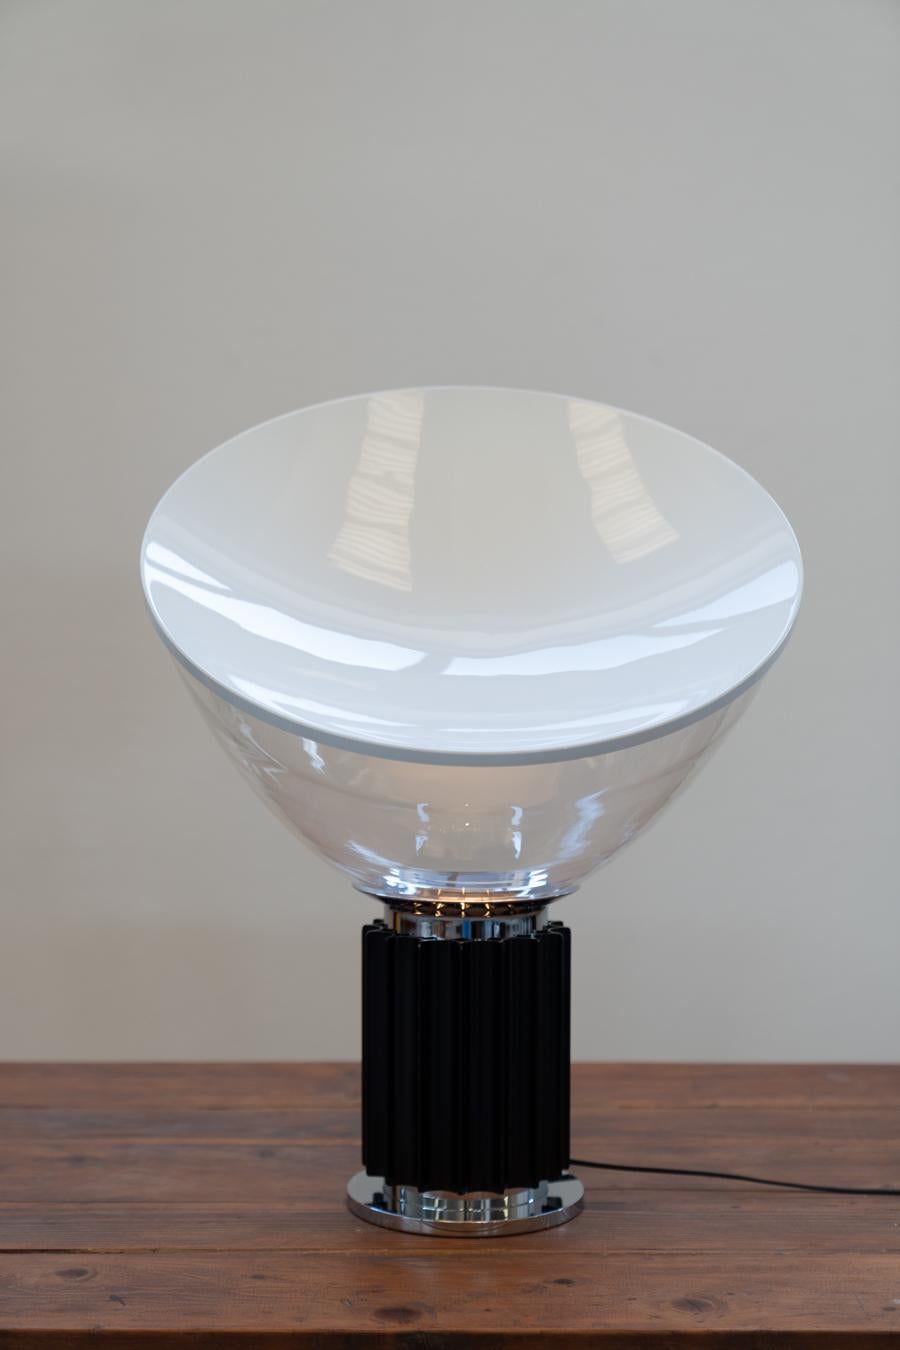 Taccia Vintage Lamp by Achille and Pier Giacomo Castiglioni, for Taccia
TACCIA  is a lamp designed and created by the Castiglioni brothers in 1962 for the Italian brand FLOS. It consists of a circular base on the air of Greek columns and a diffuser